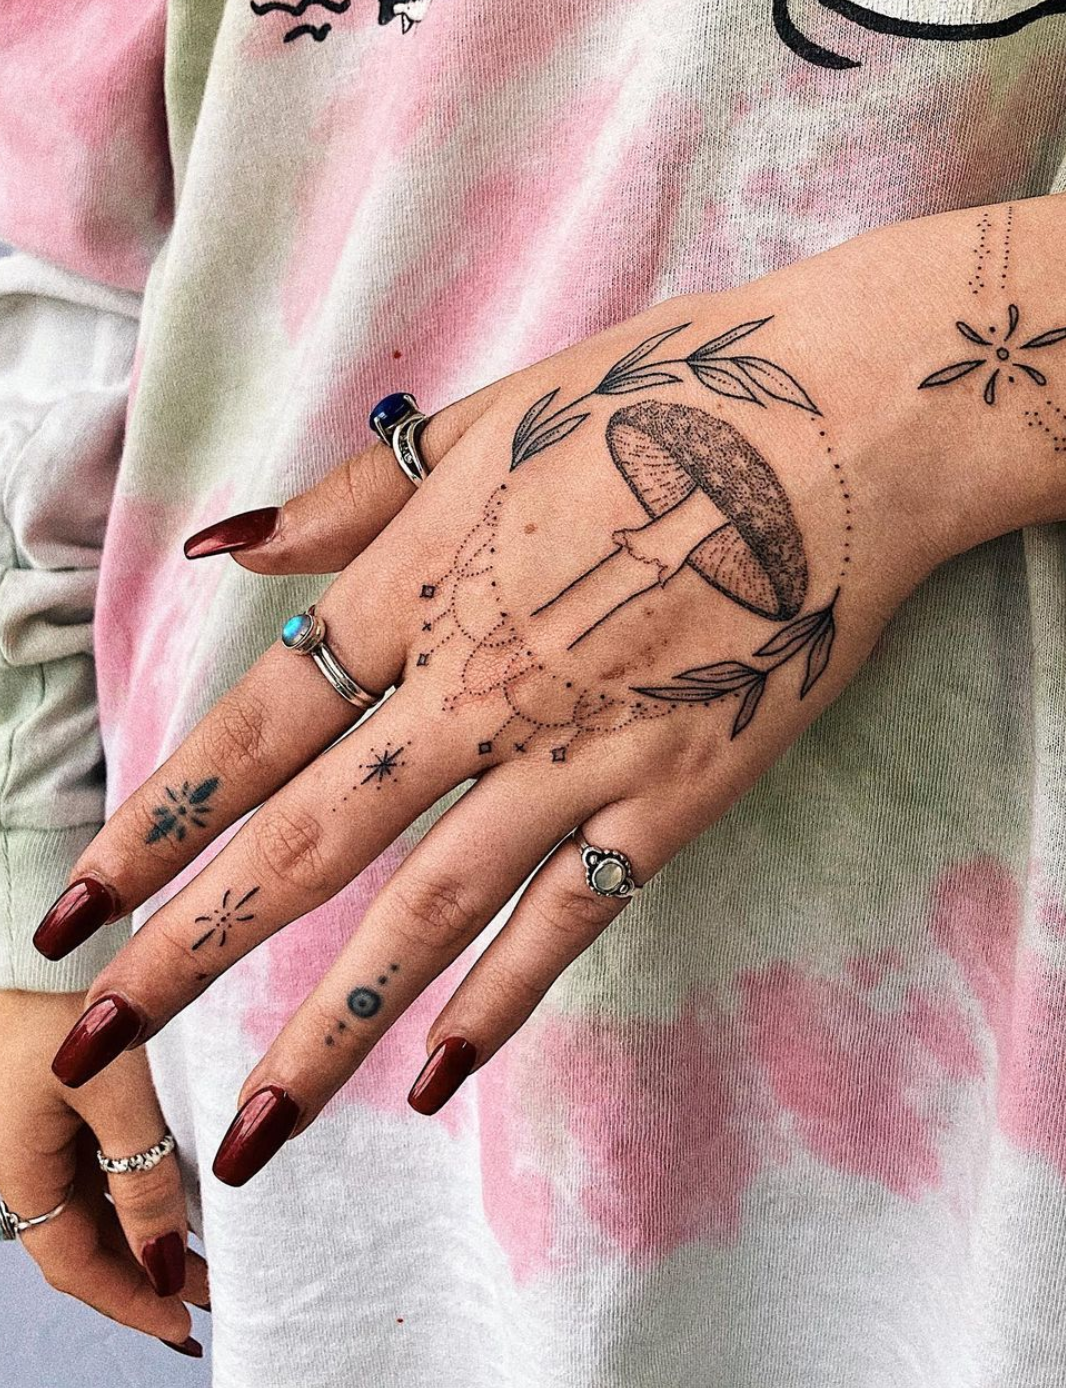 These stickandpoke tattoos are exactly what we need to get through the  mess that